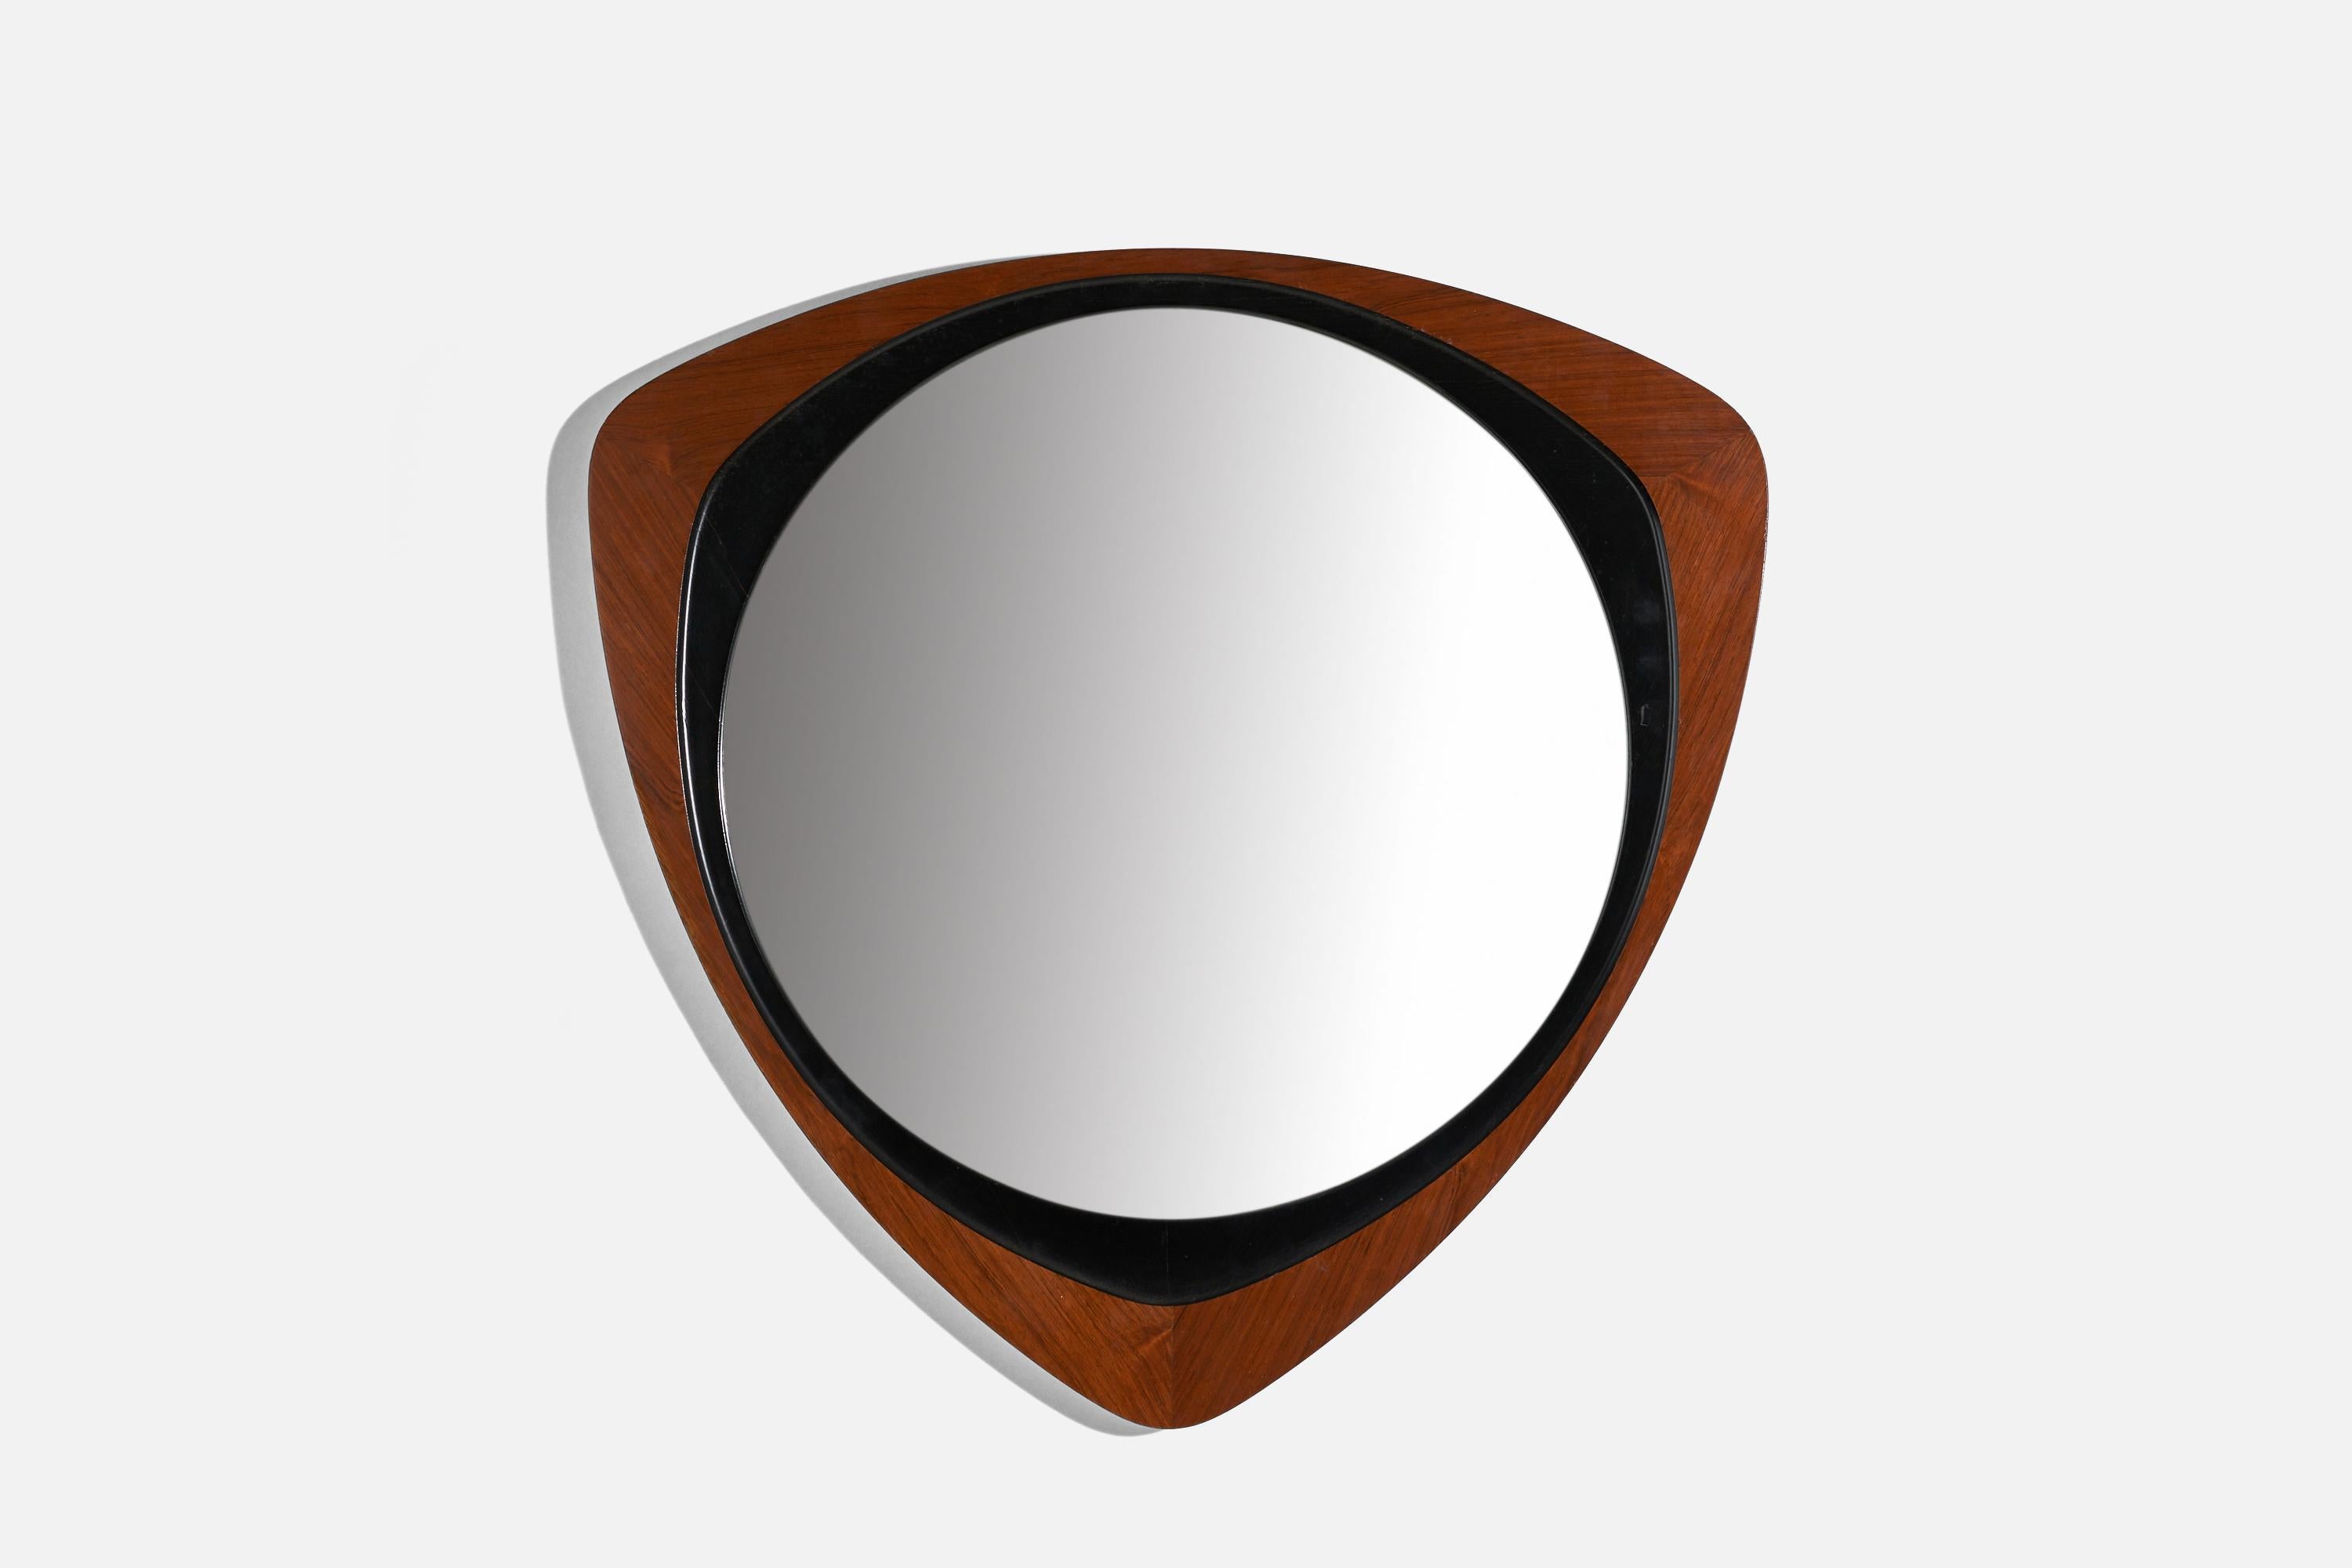 A rosewood and black-painted wood wall mirror designed and produced by Glas & Trä, Sweden, 1950s.